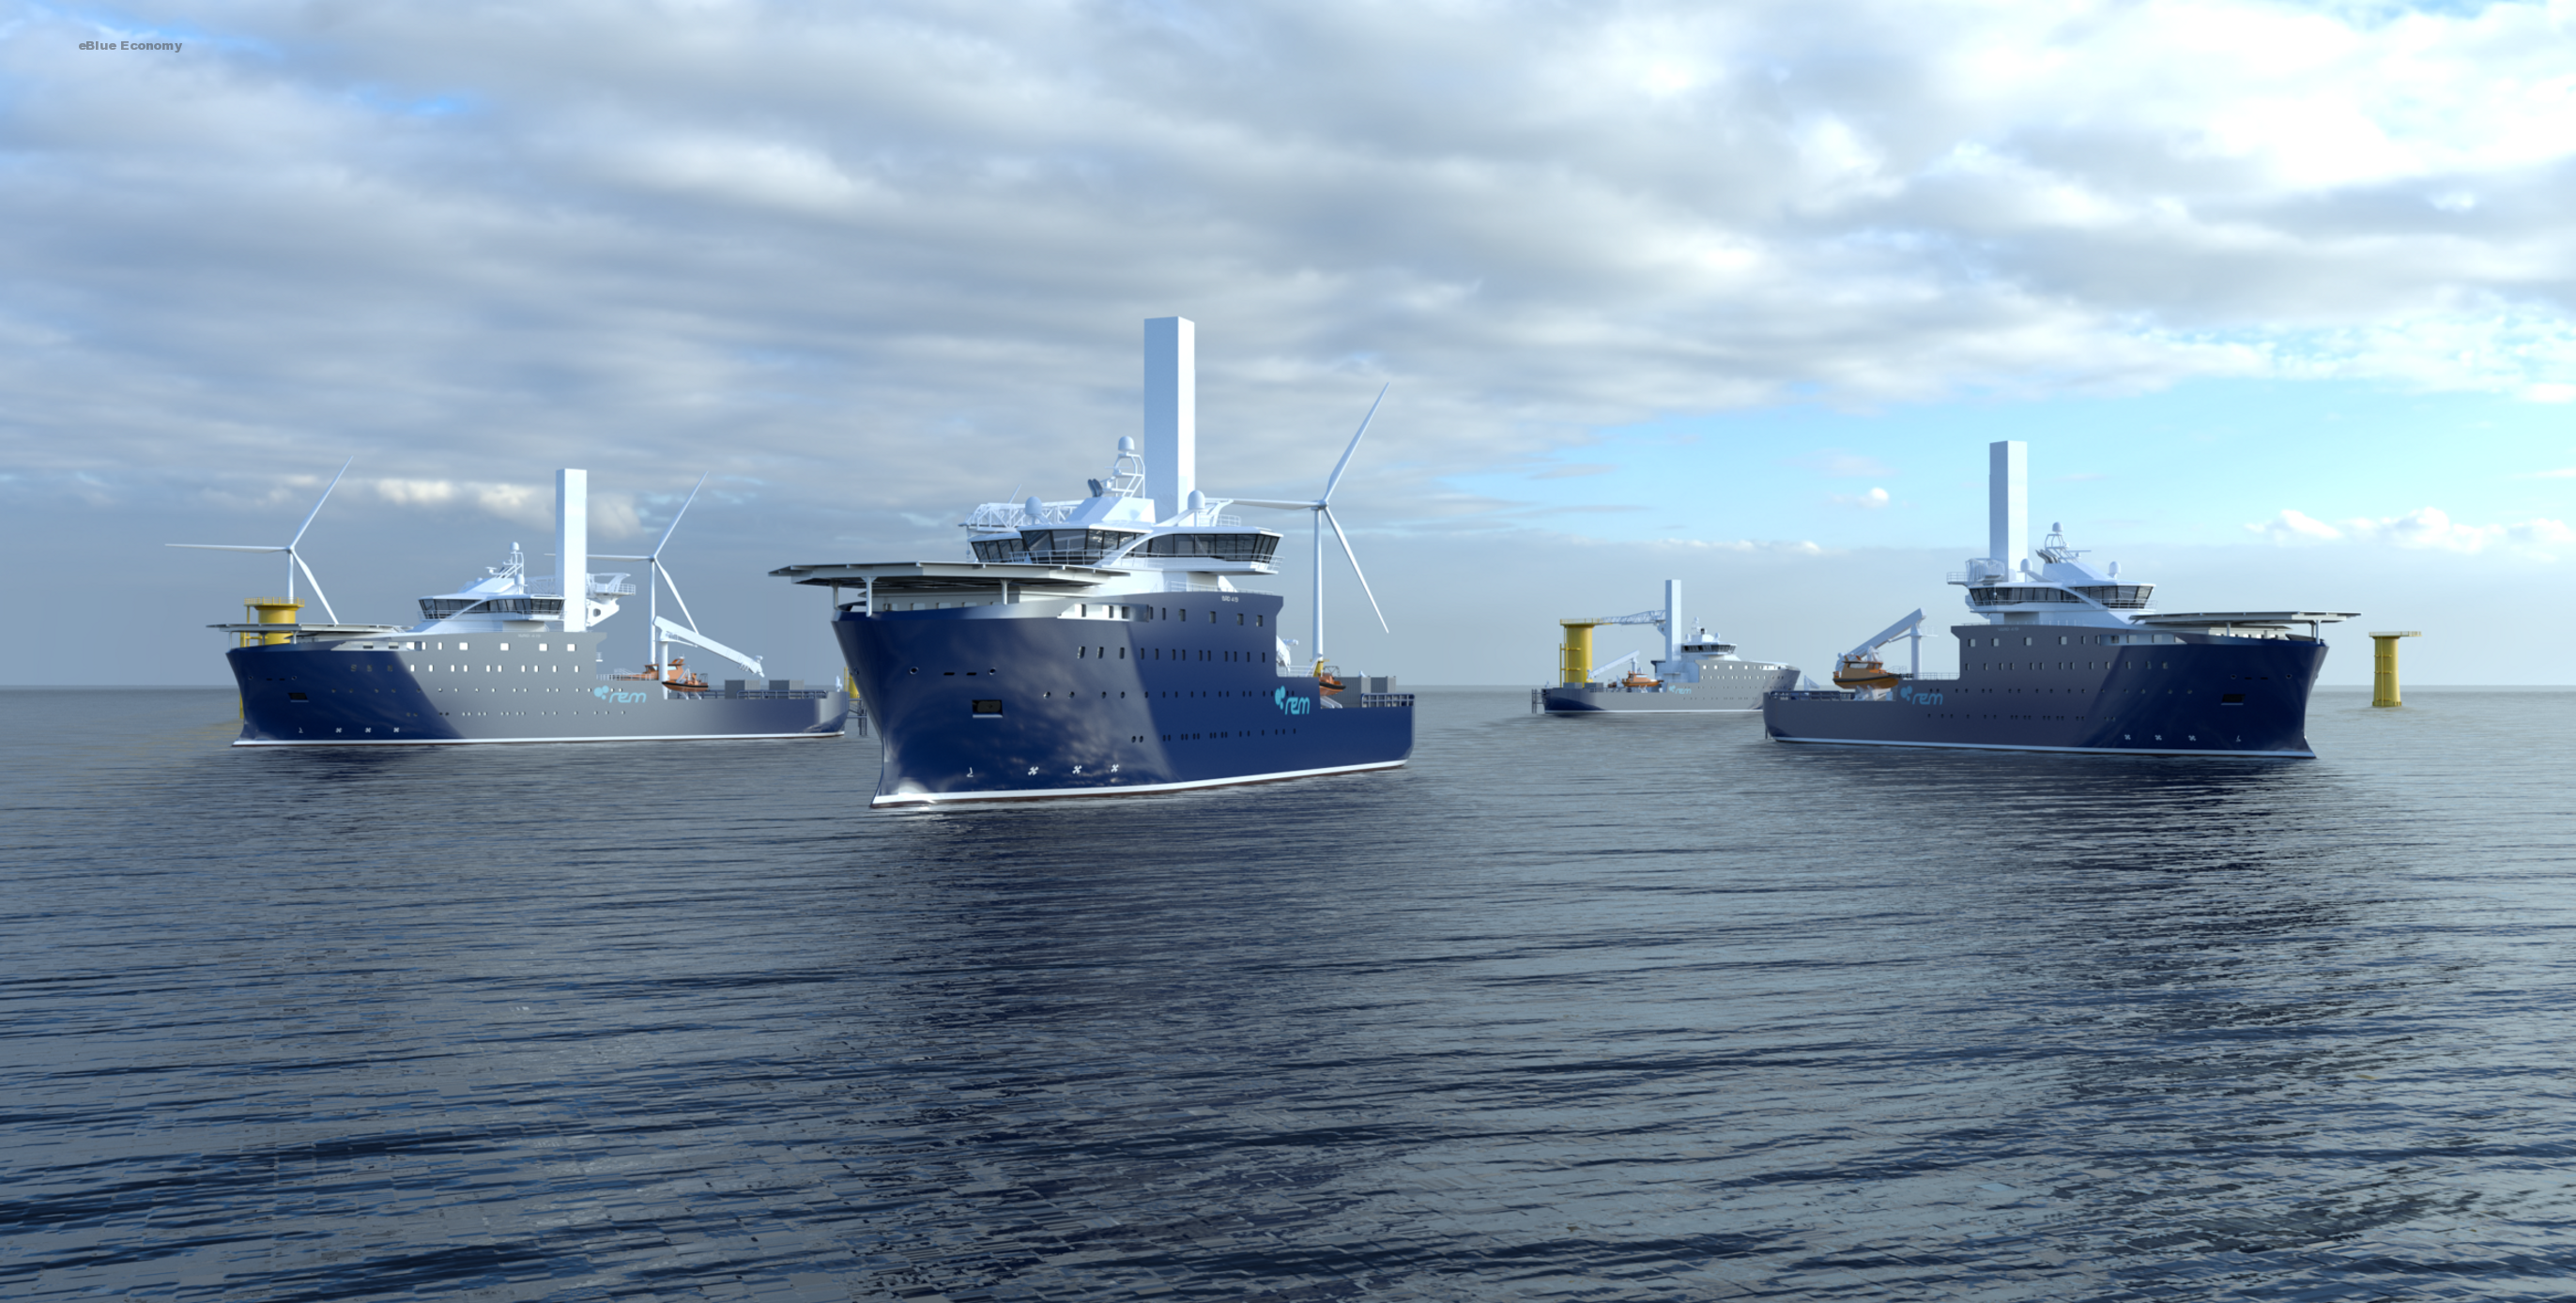 eBlue_economy_ Rem Offshore and VARD signed contracts for the design and construction of Construction Service Operations Vessels